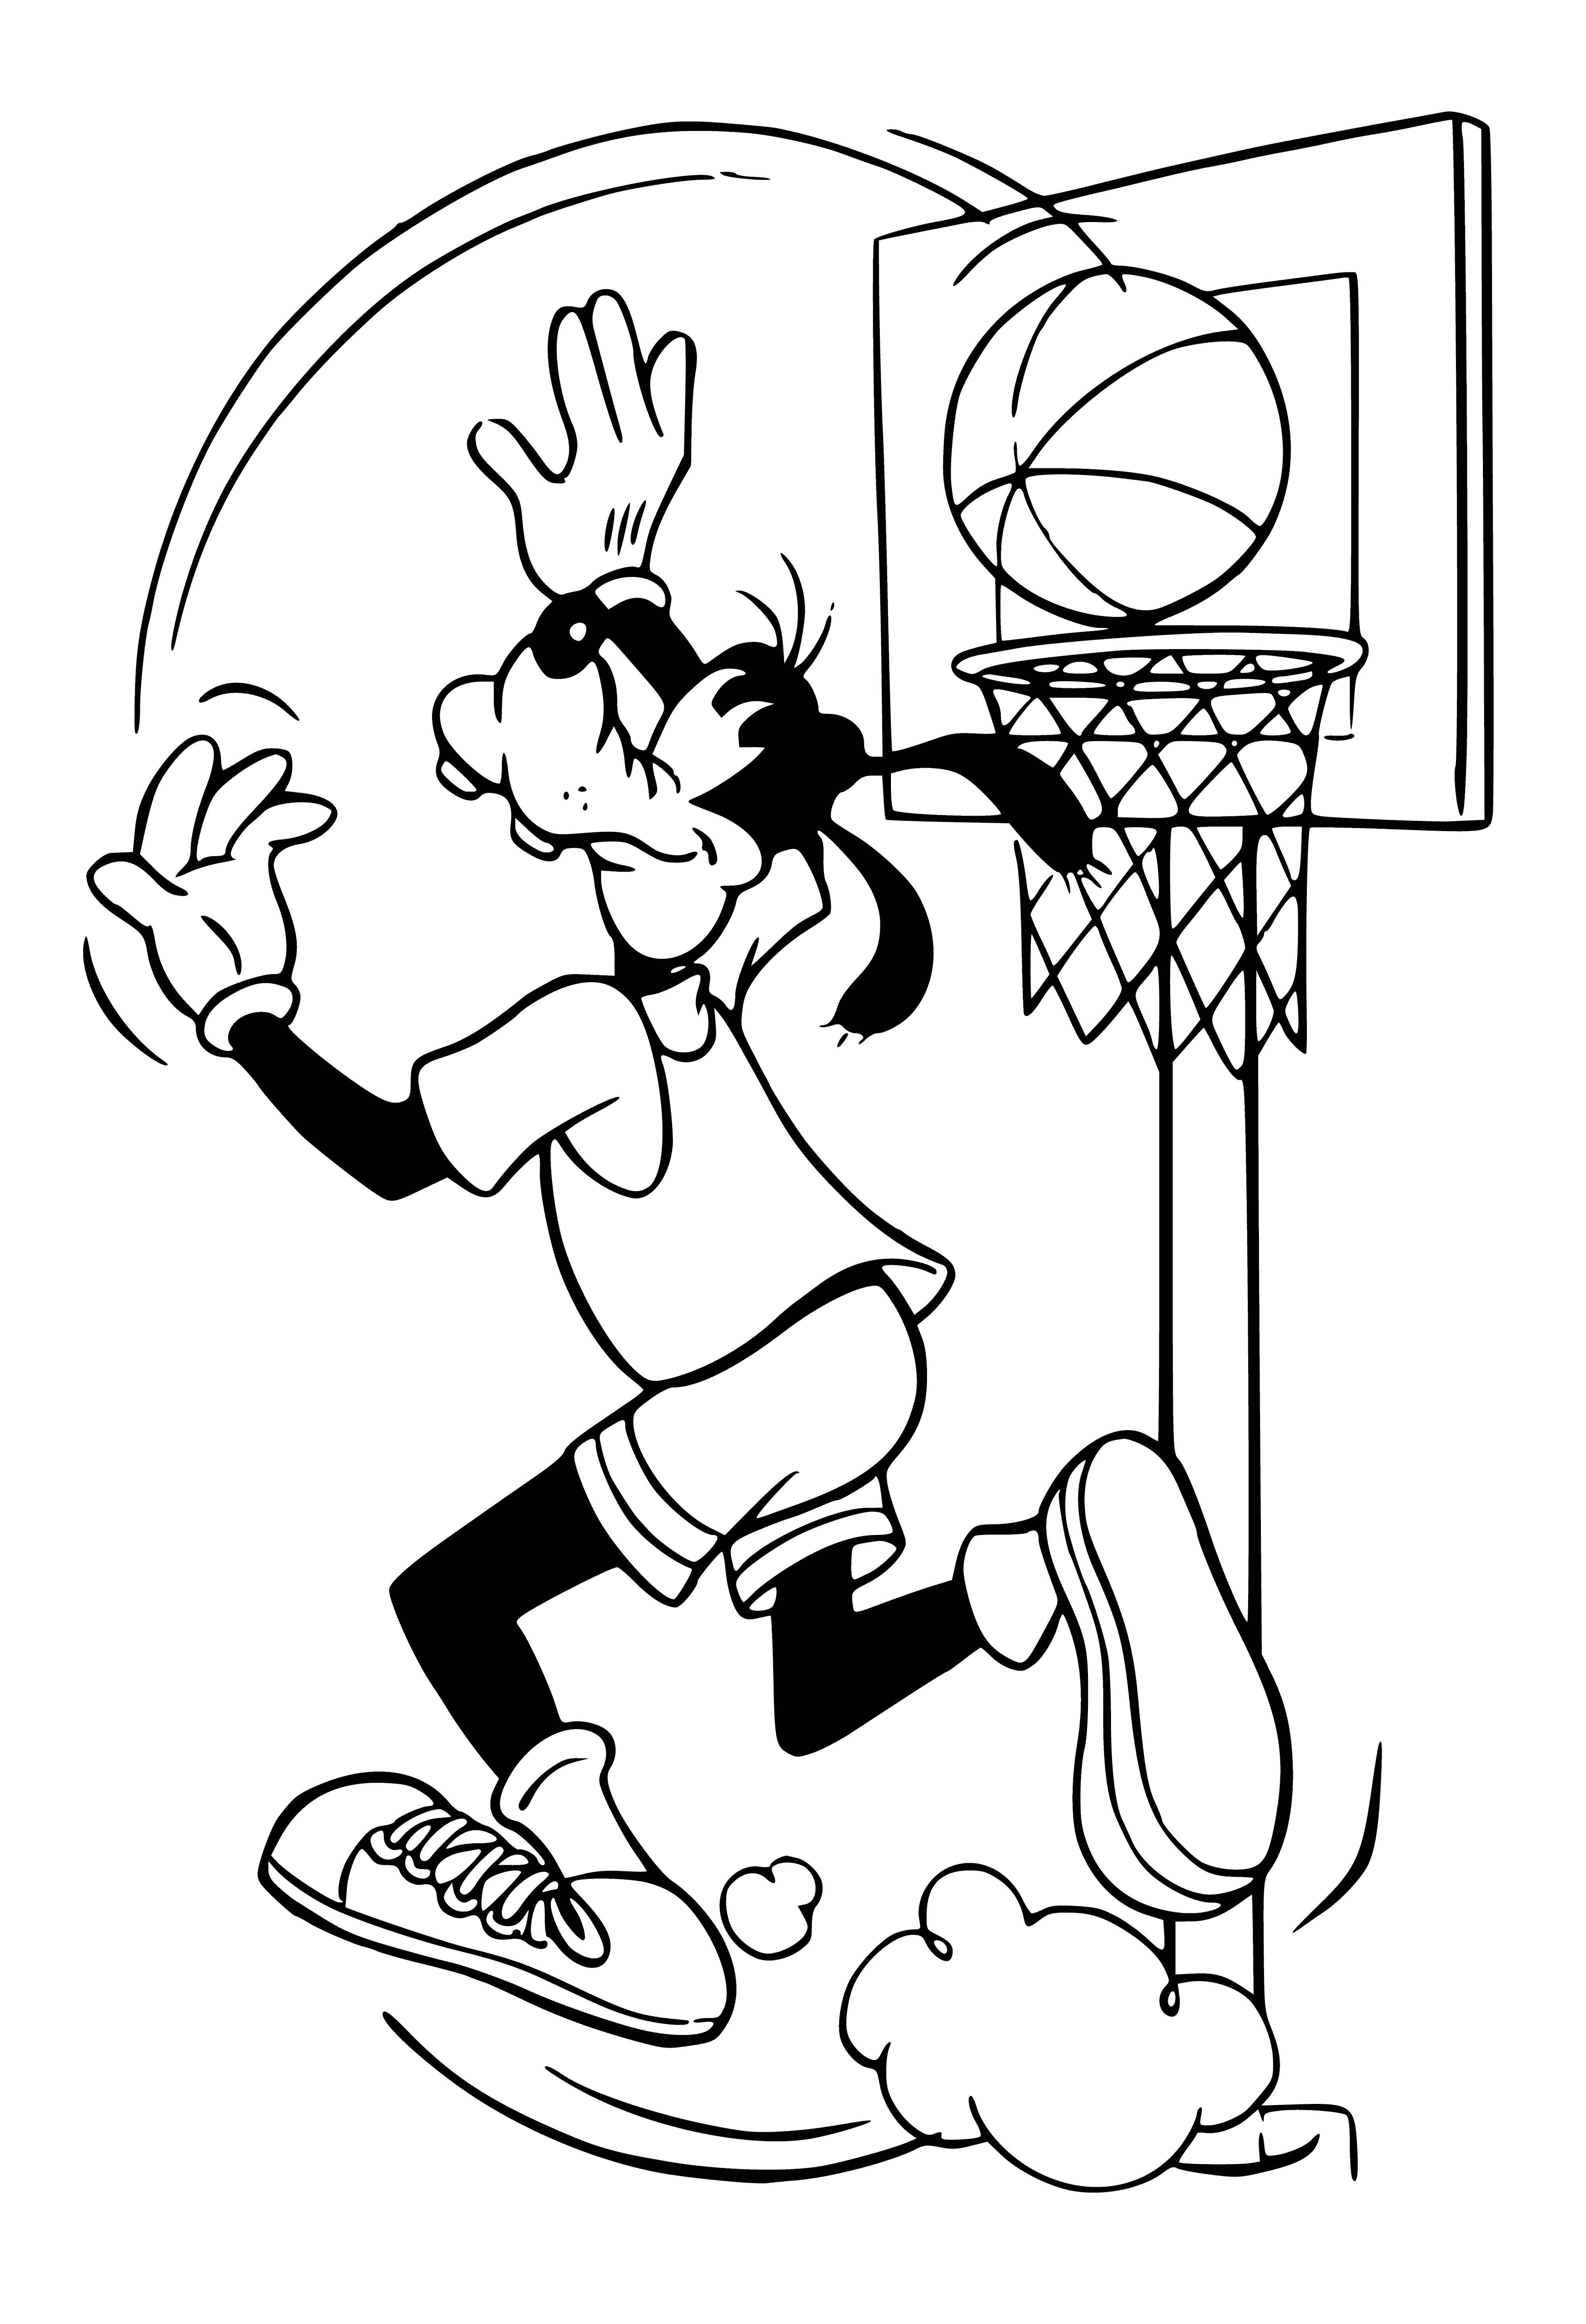 coloring page: Mickey, Donald and Goofy playing basketball in clothes too big, having fun and smiling. #Disney